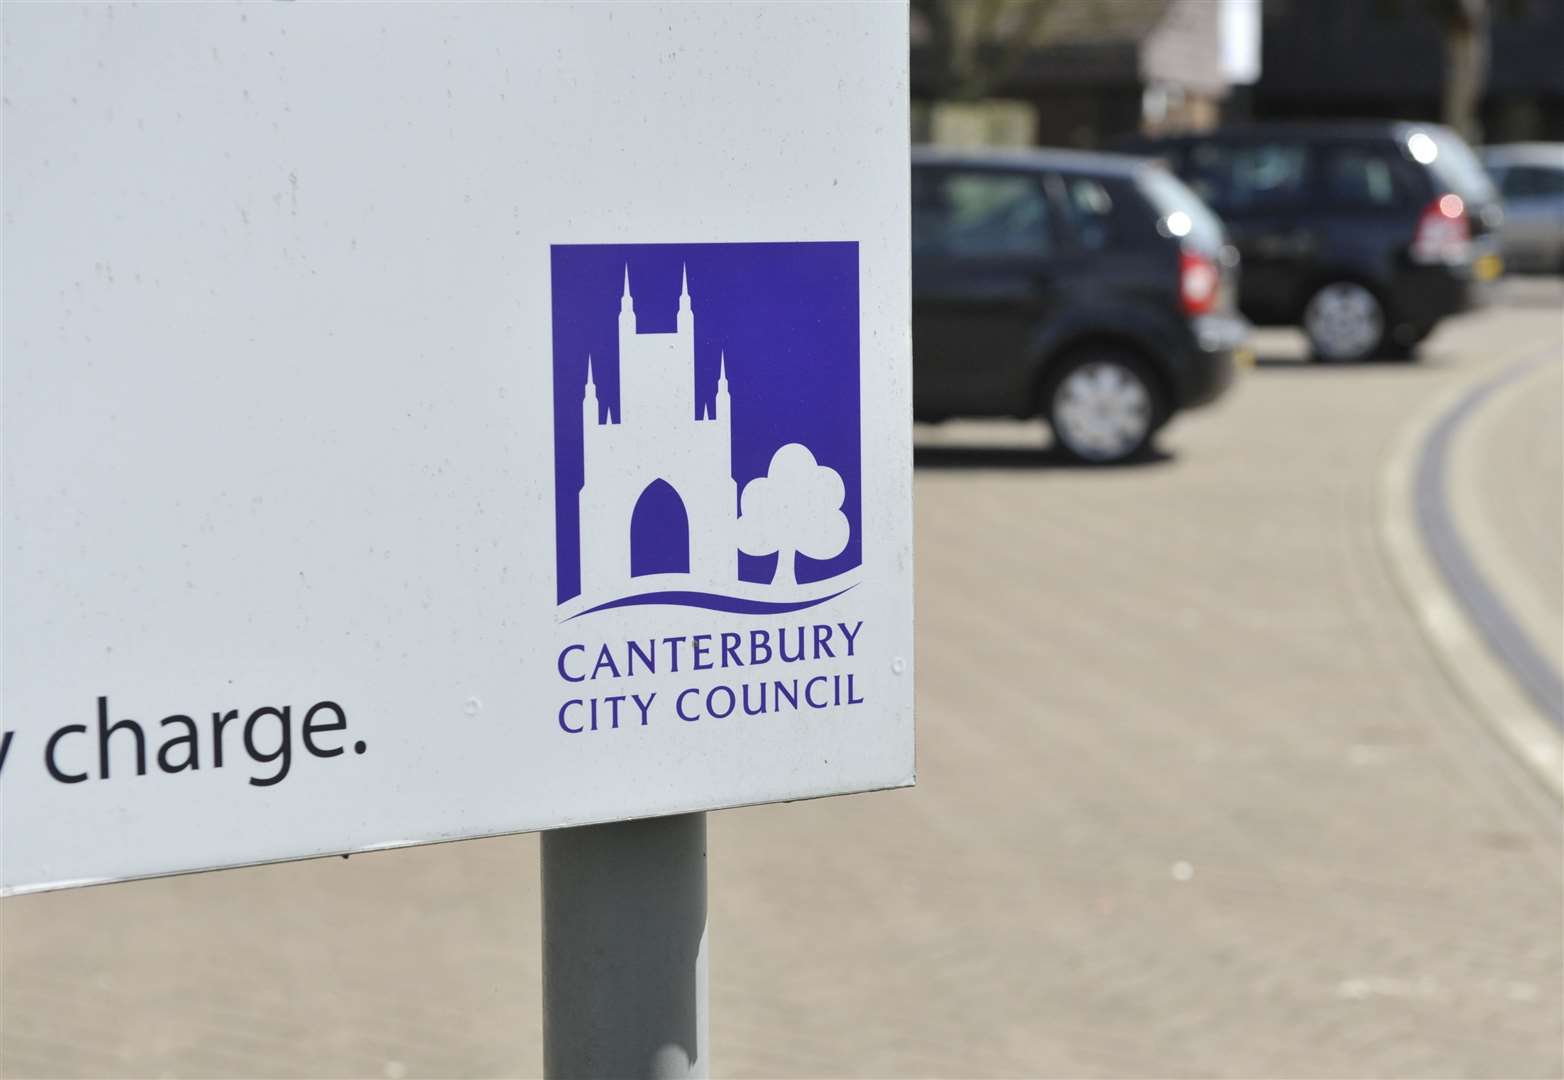 Canterbury council was criticised because it had increased parking permit charges